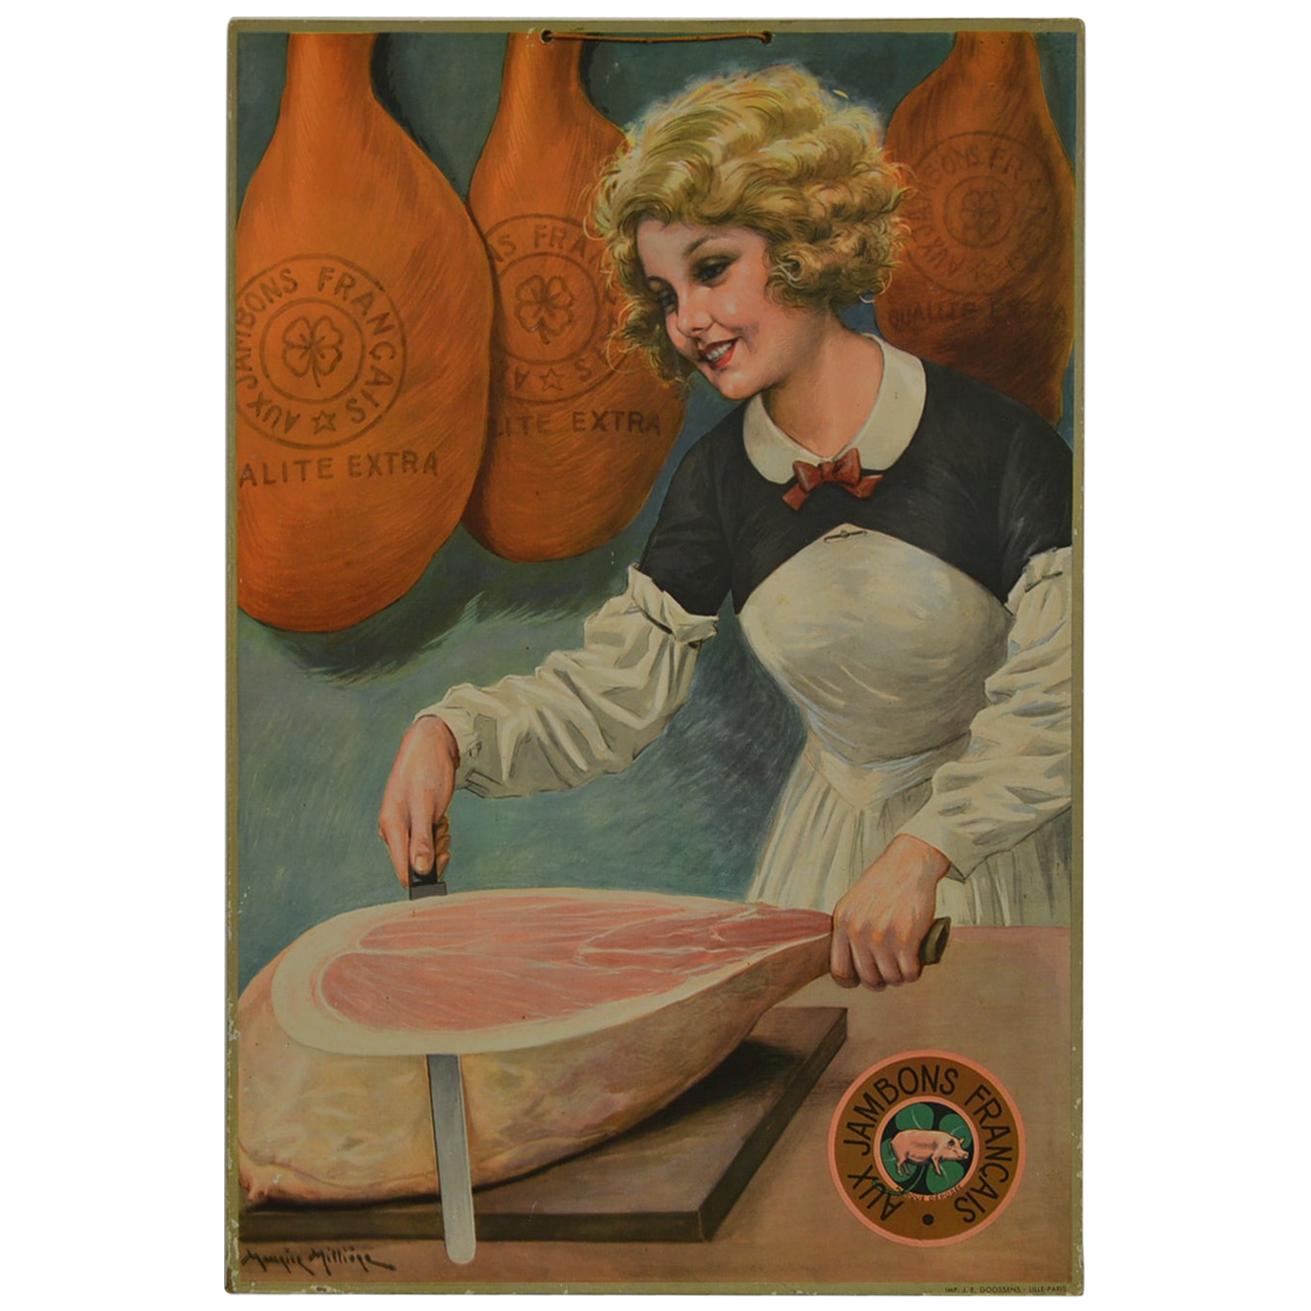 1930s Advertising Sign for French Ham, Designed by Millière Maurice